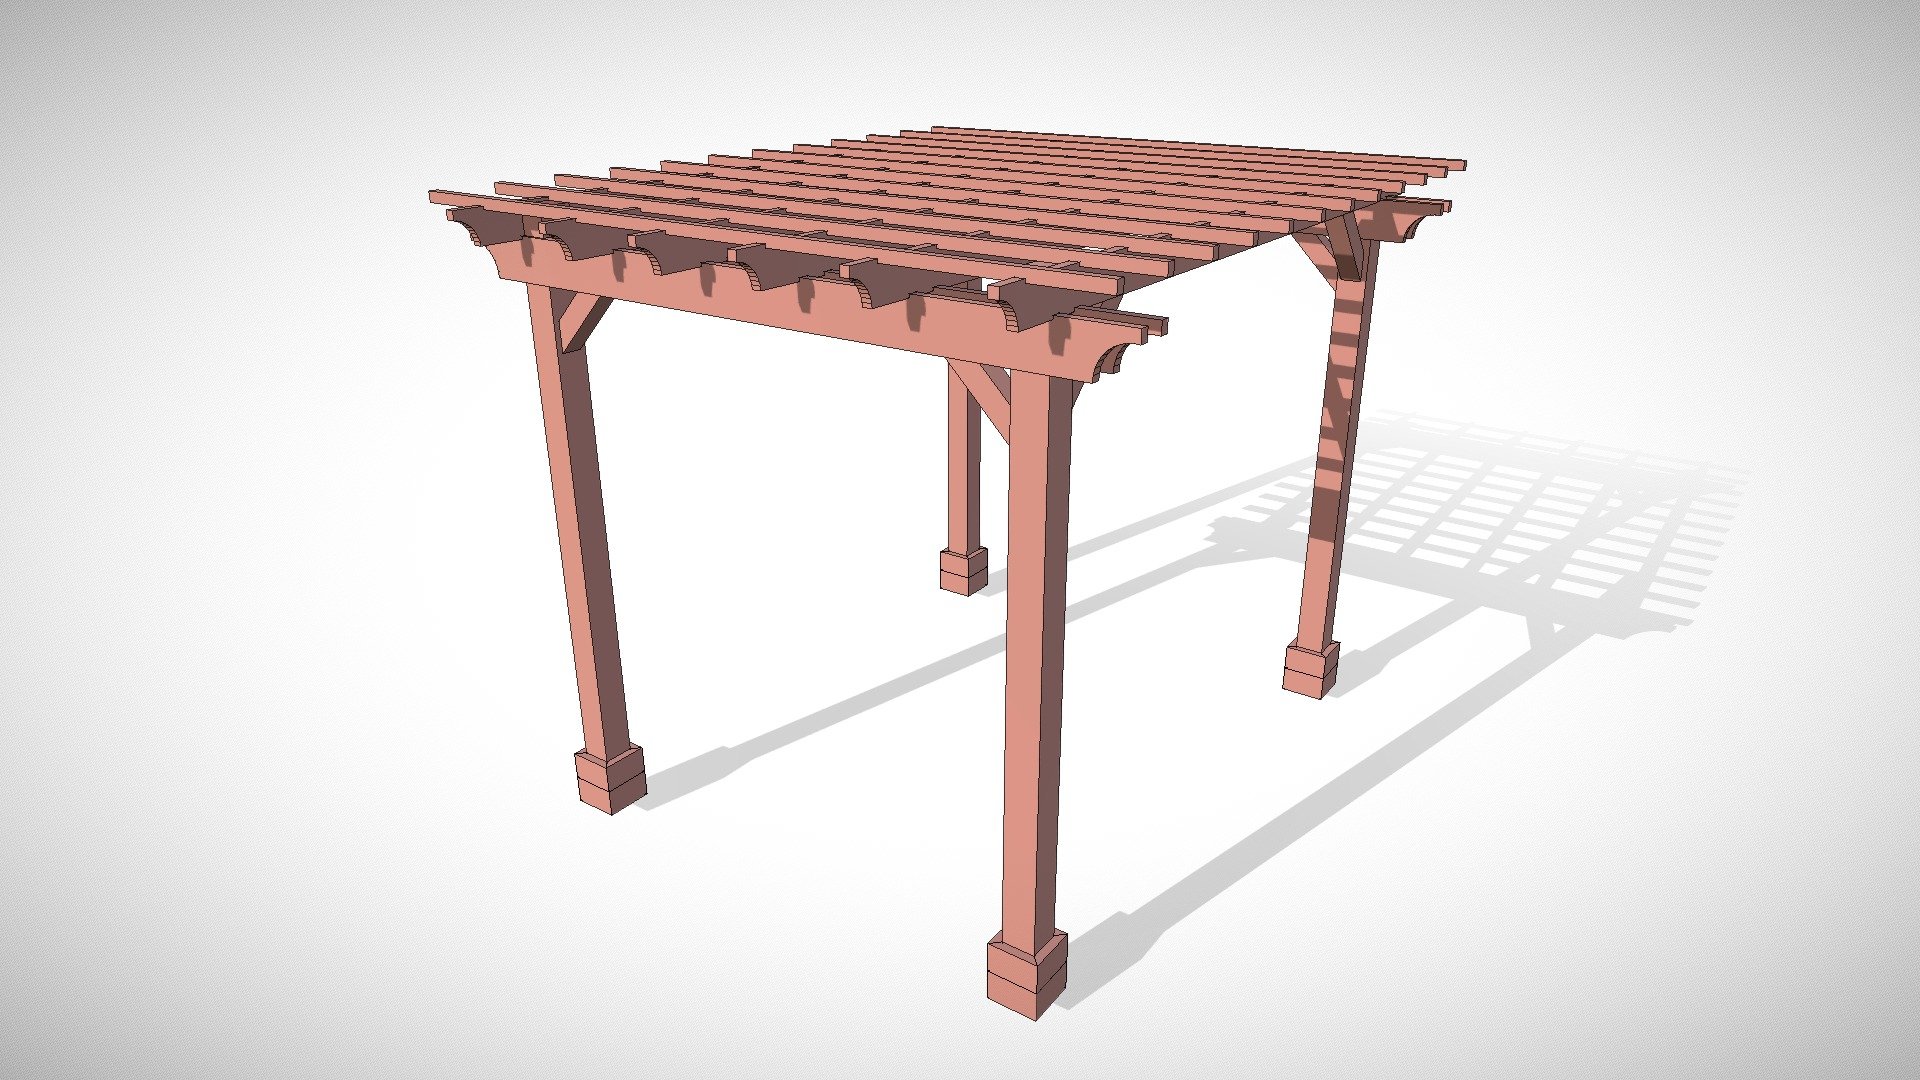 Traditional Wooden Garden Pergola - 

Options: 


12ft L x 10ft W, 
California Redwood, 
9ft Post Height, 
6in Post Thickness, 
4 Post Kit for Stone, Brick or Concrete (with Anchor Bolts) with Trim Box, 
Transparent Premium Sealant.

Processed by RB.

Visit us for more of our products.
https://www.foreverredwood.com/ - The Traditional Wooden Garden Pergola - 3D model by Forever Redwood (@foreverredwood) 3d model